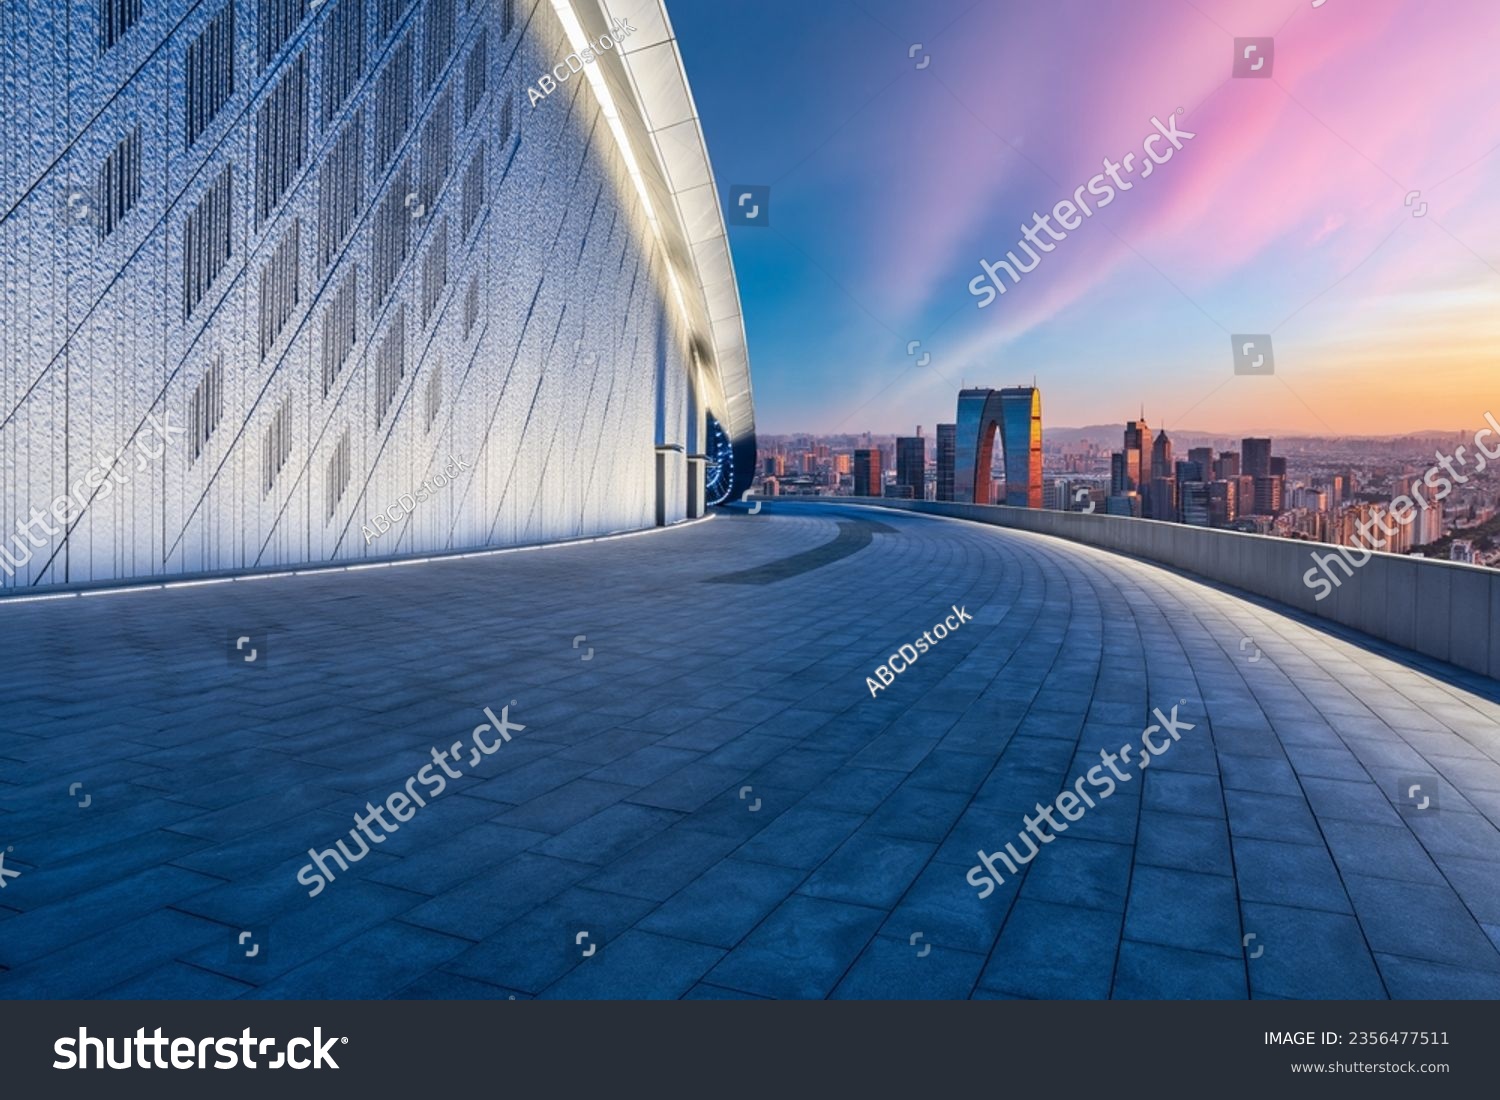 Empty floor and modern city skyline with building at sunset in Suzhou, Jiangsu Province, China. high angle view. #2356477511